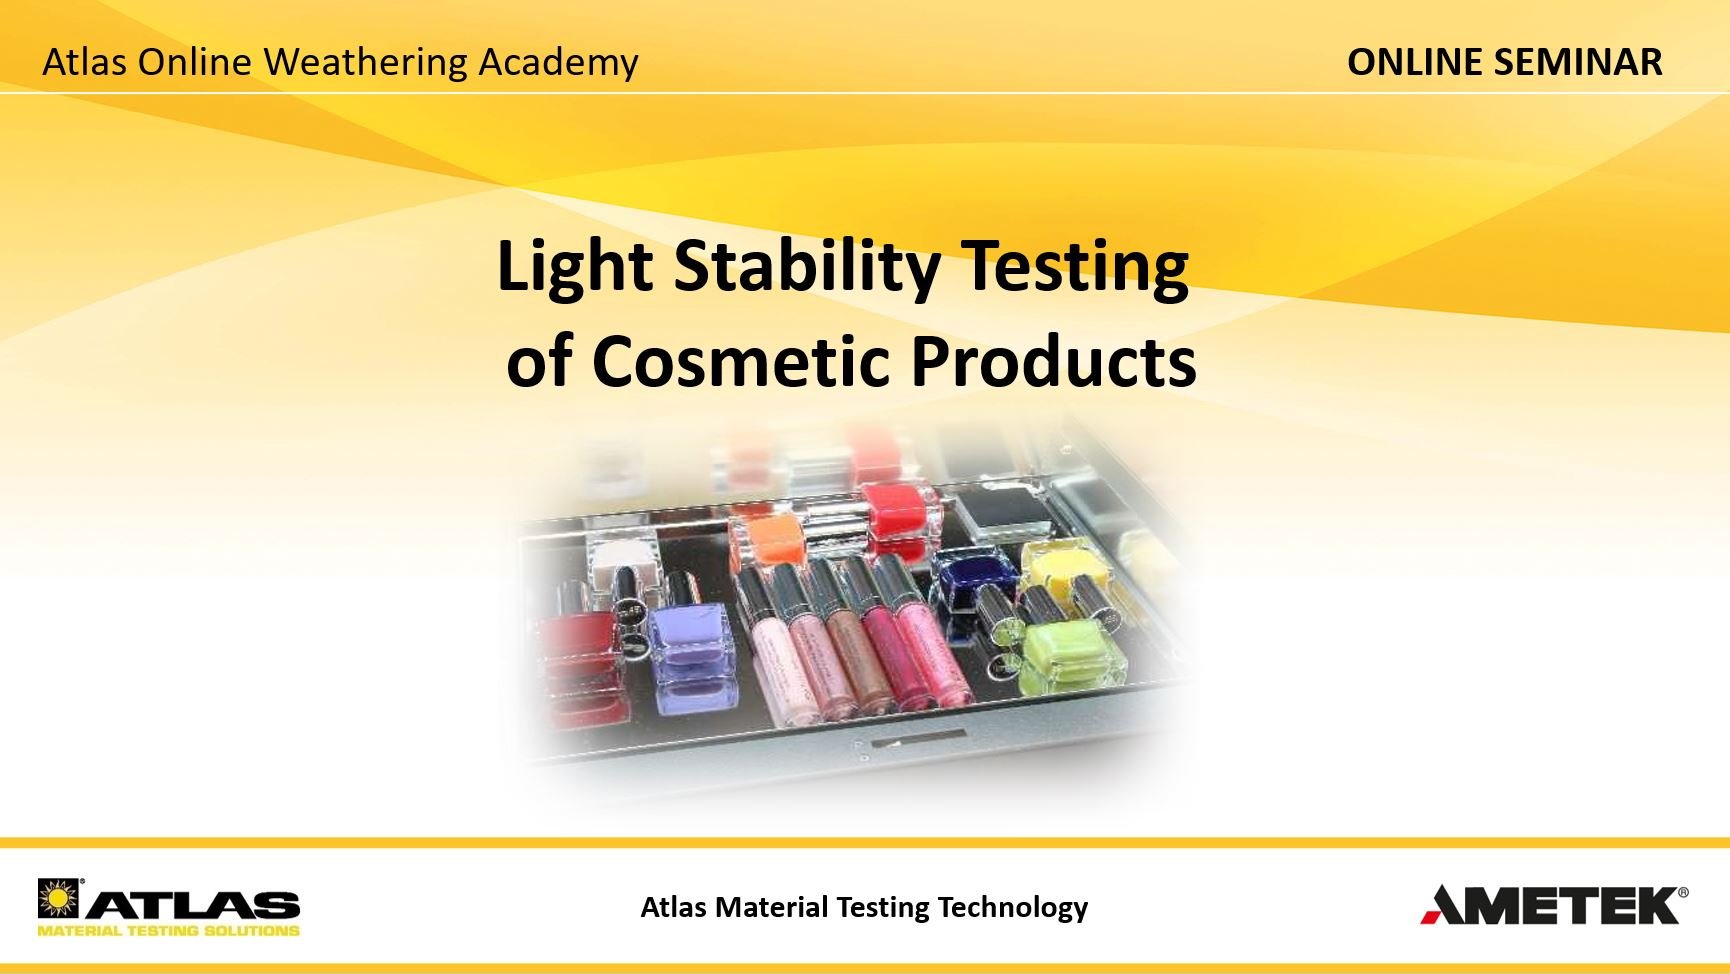 16-9 Online Seminar-Cover-Light-Stability-of-Cosmetics AR-2022-08-10